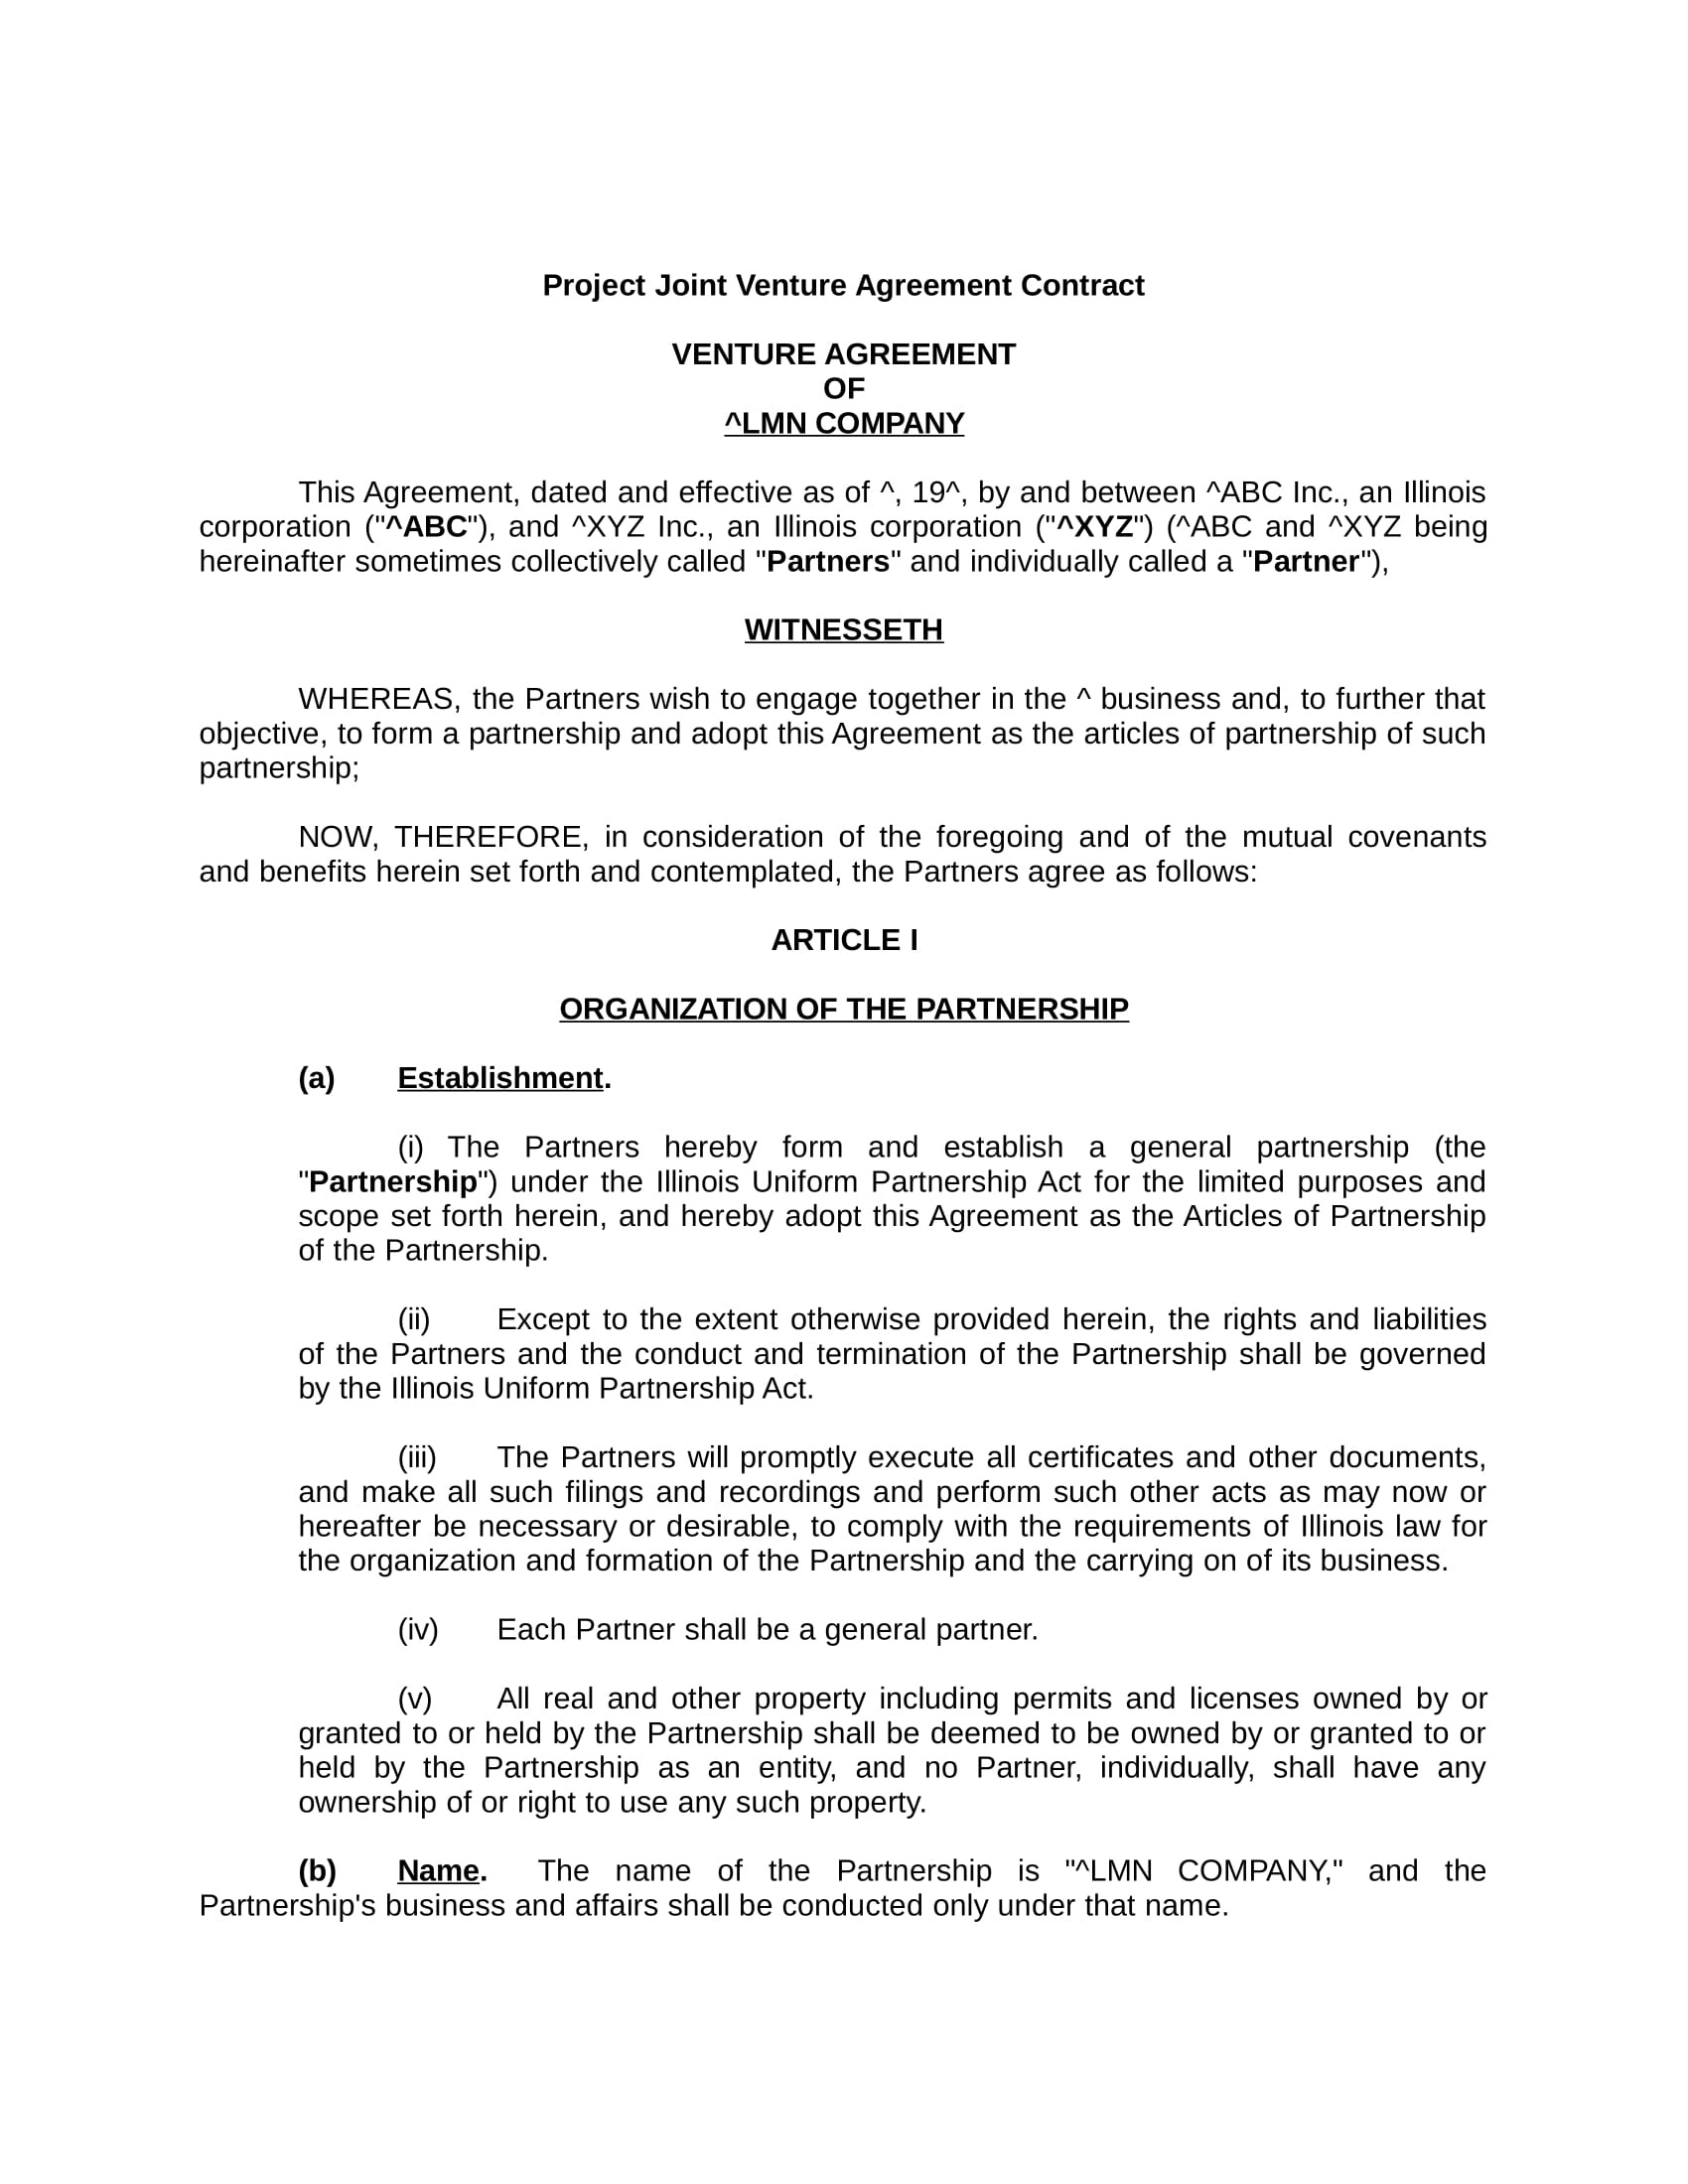 project joint venture agreement contract form 01